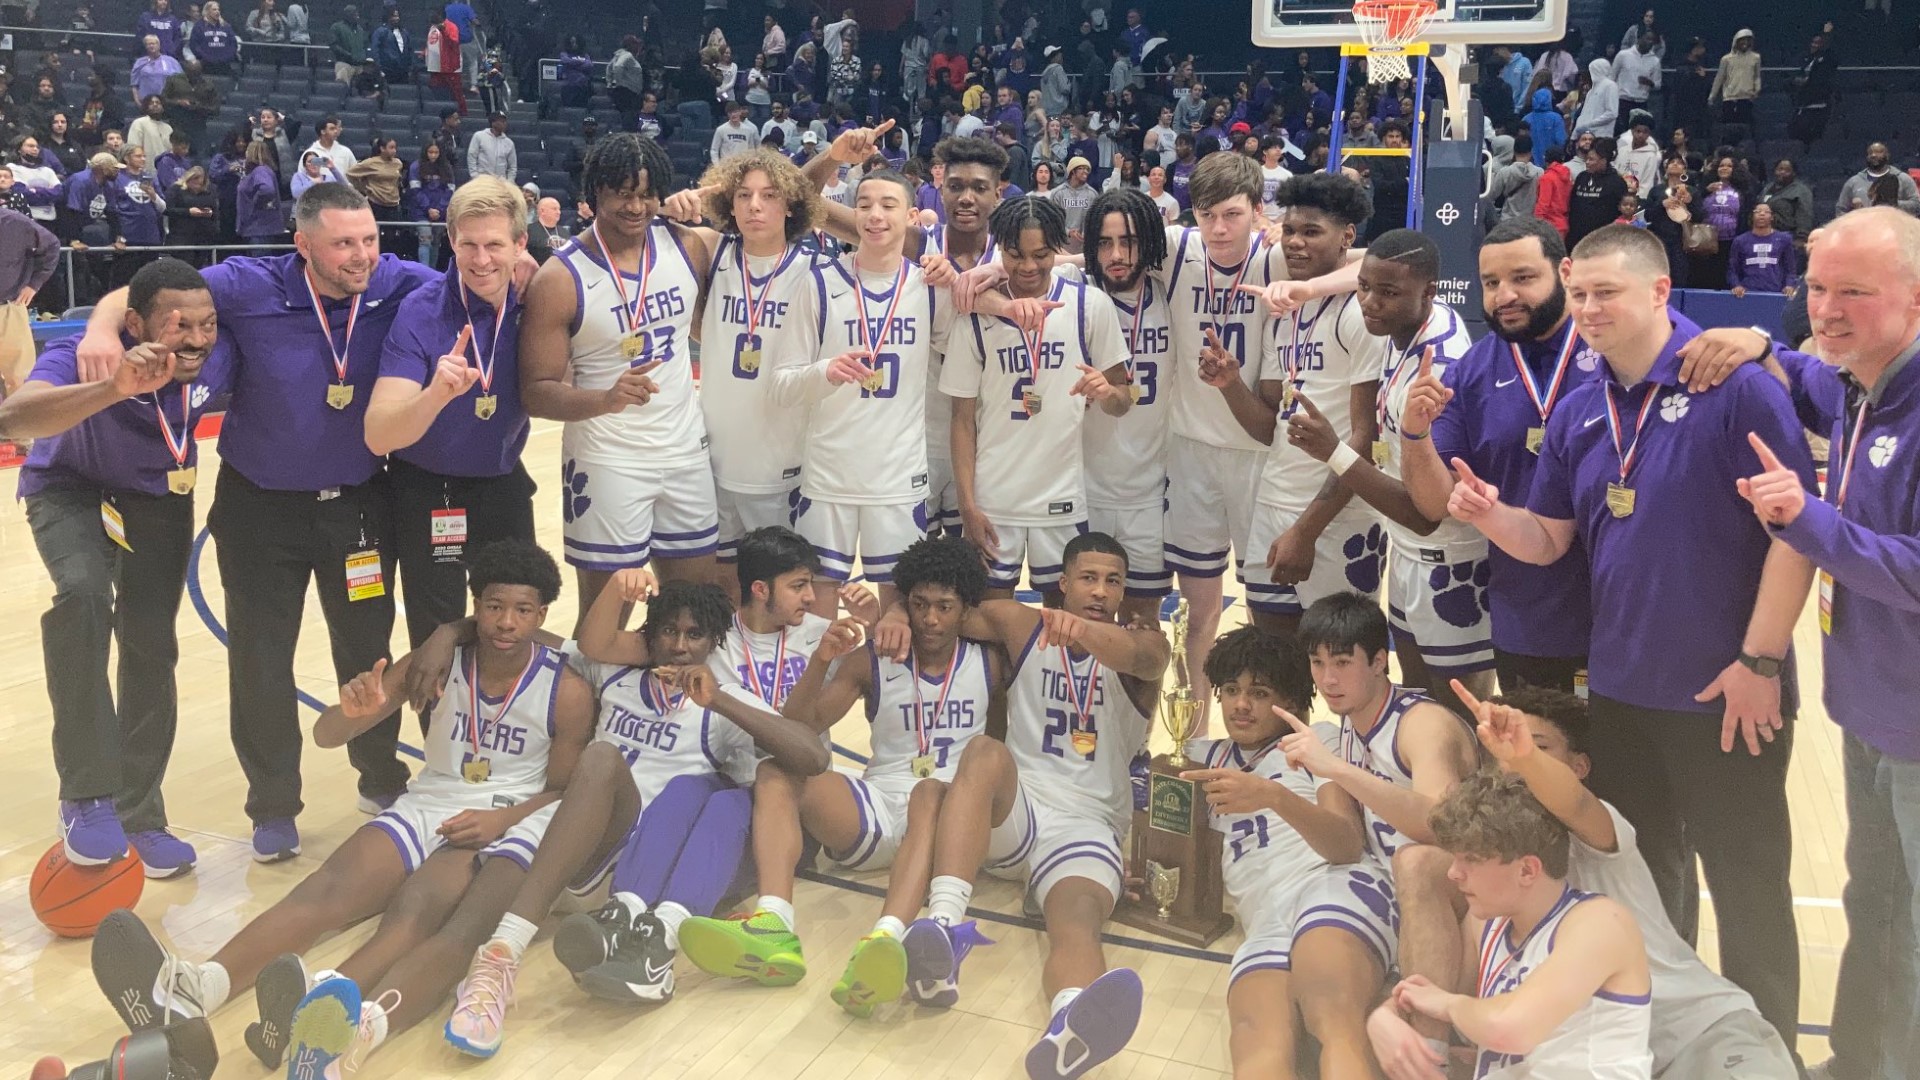 It's the school's first state title in boys basketball since 2012.